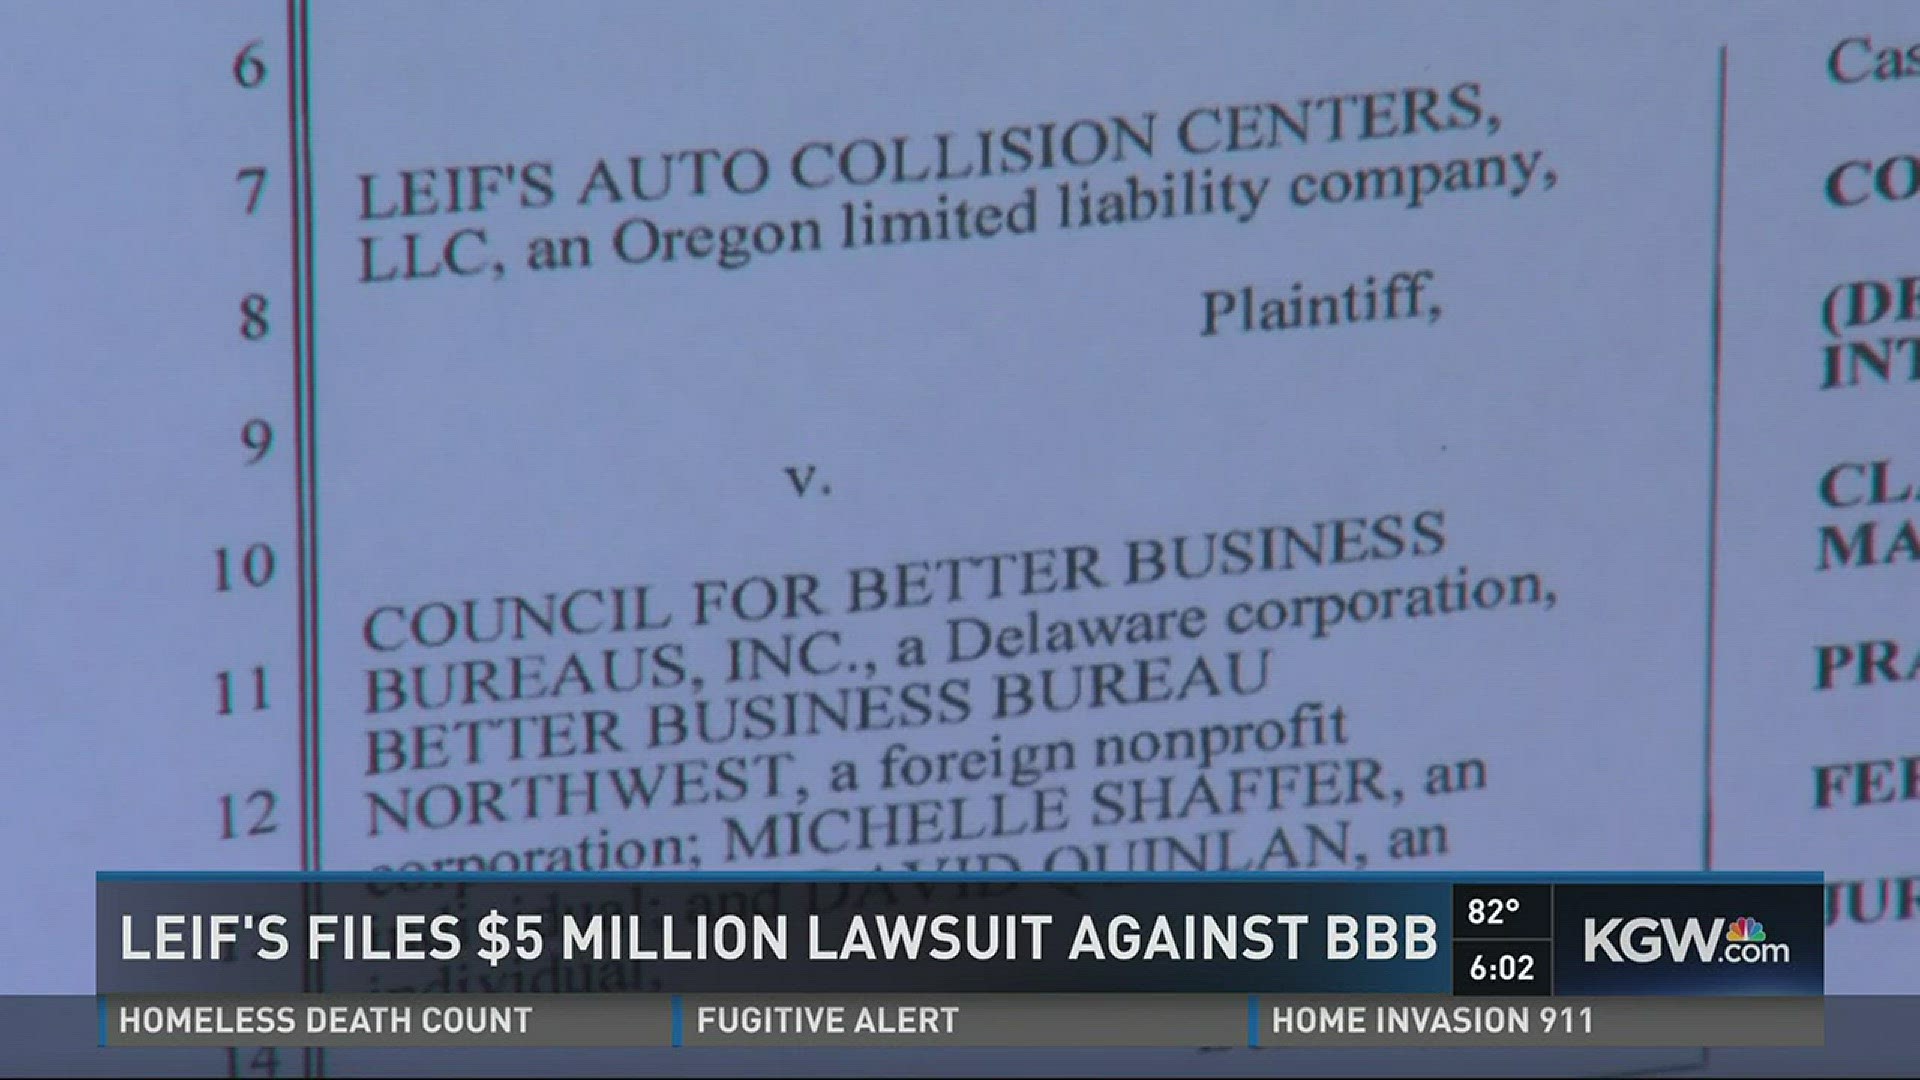 Leif's sues BBB after 'F' rating